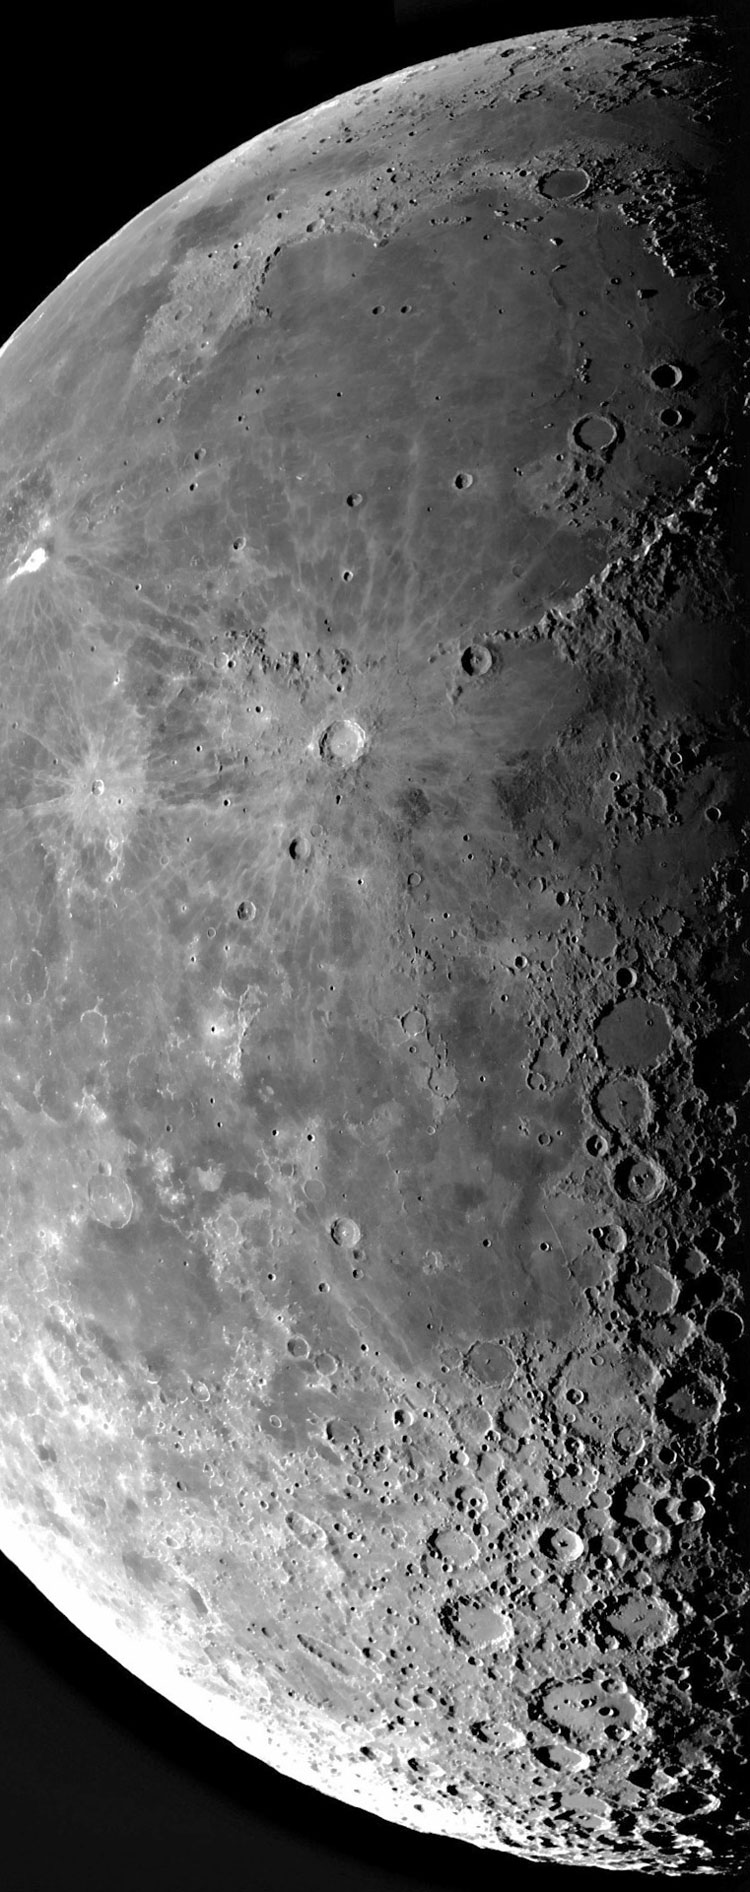 Misti Observatory image of third-quarter moon showing considerably more detail than most such images